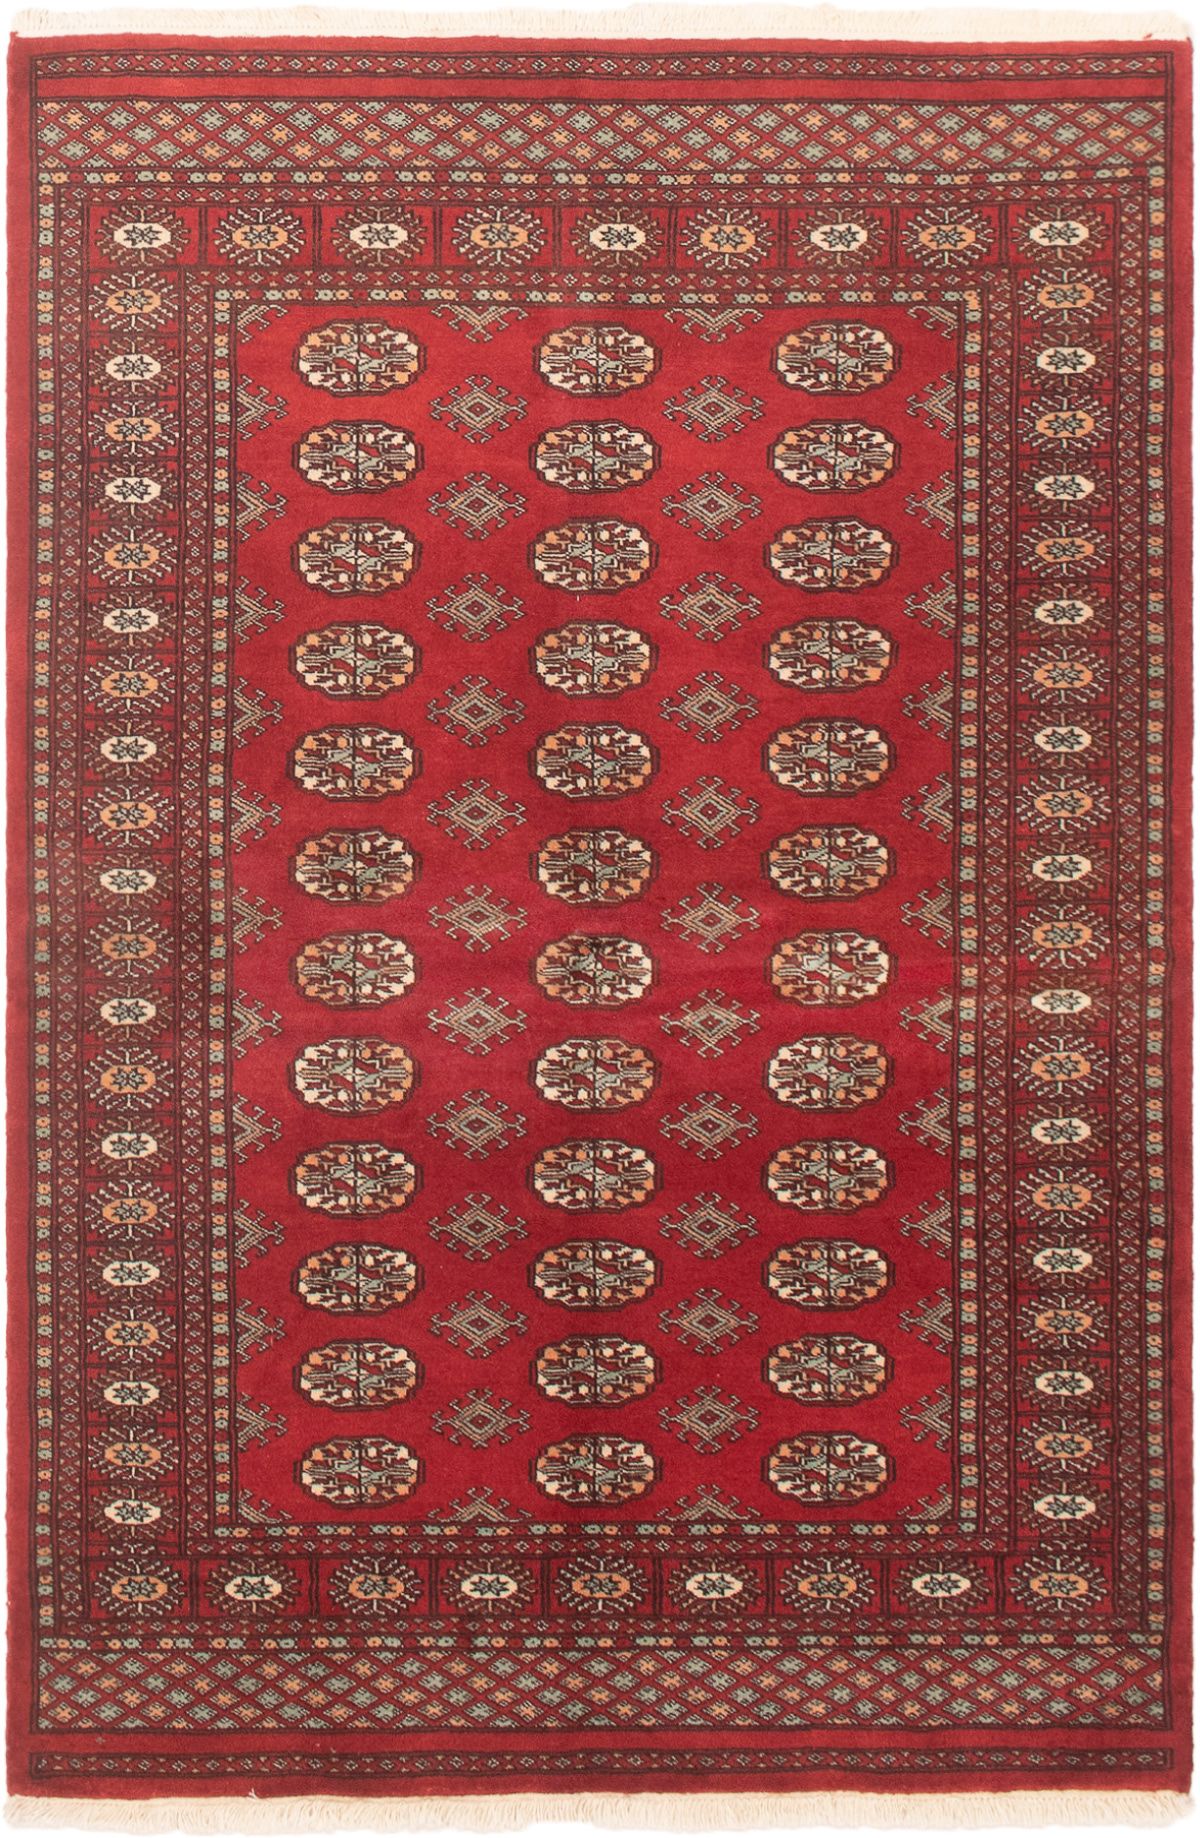 Hand-knotted Finest Peshawar Bokhara Red Wool Rug 4'1" x 5'11"  Size: 4'1" x 5'11"  